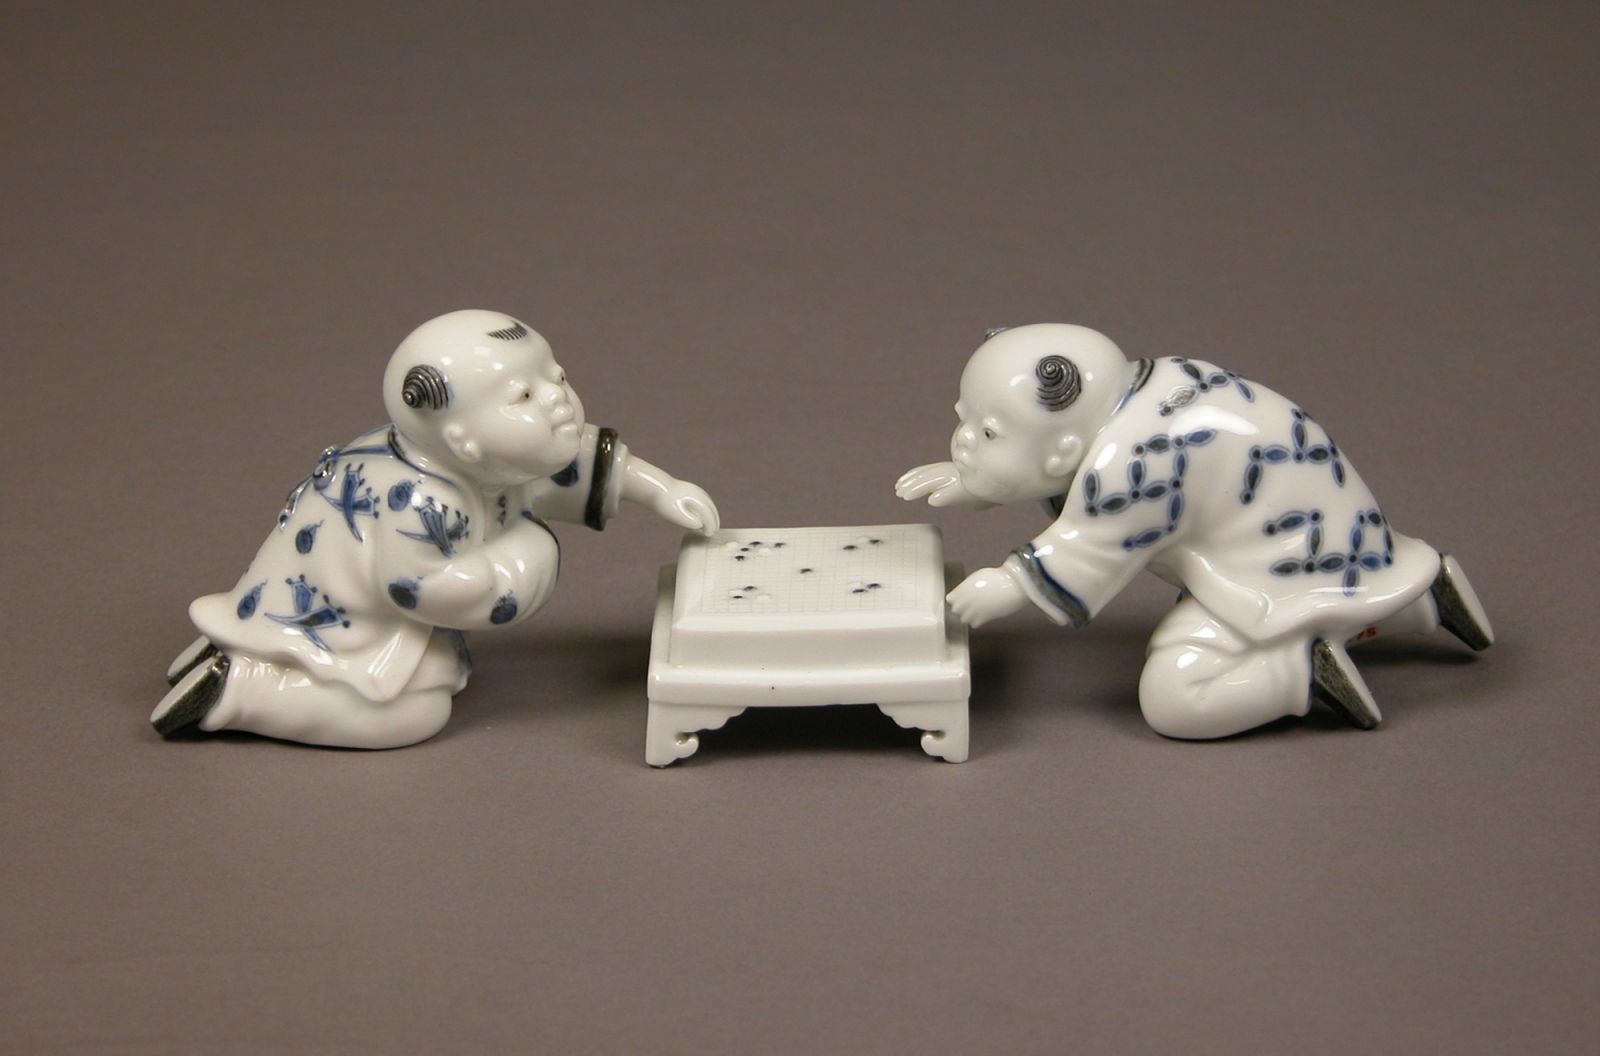 Miniature Stand for Game of Go, Edo period, late 18th century, Japan, Porcelain with underglaze blue